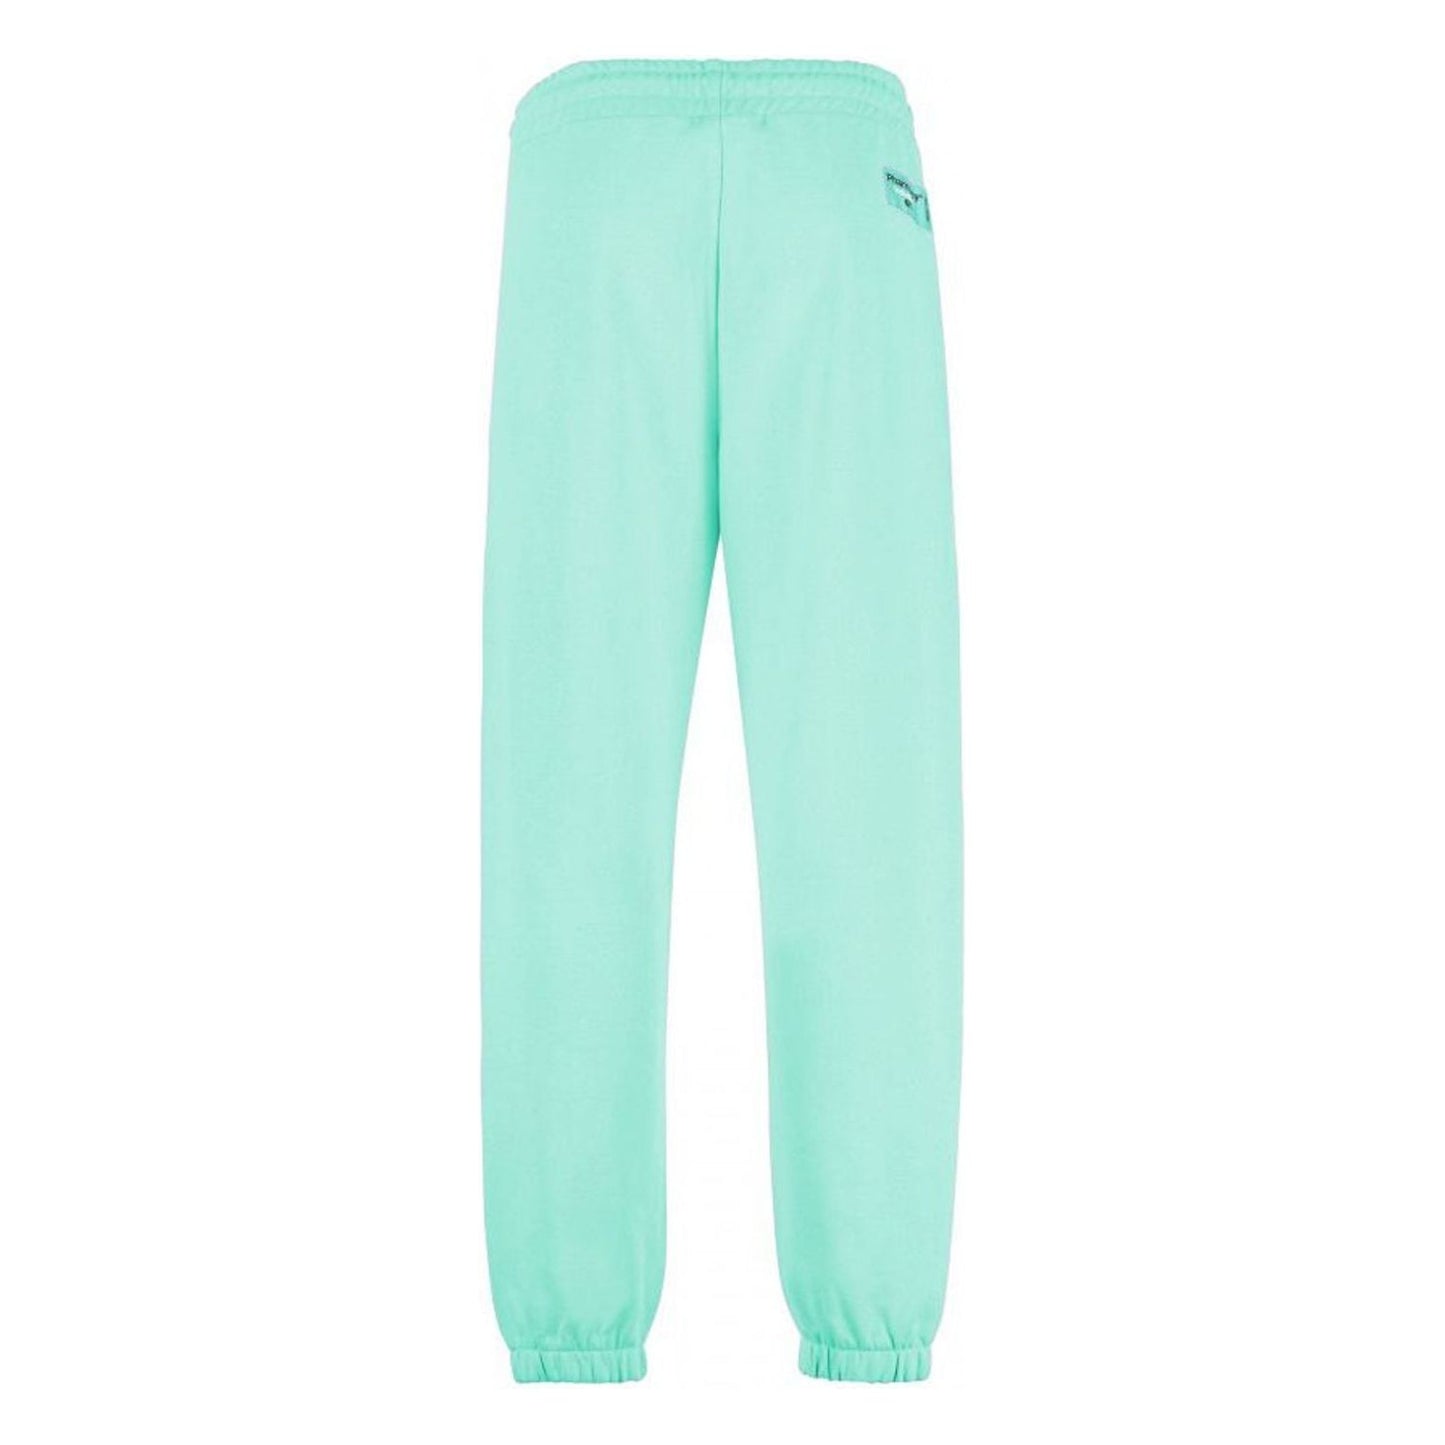 Pharmacy Industry Emerald Cotton Trousers with Logo Detail green-cotton-jeans-pant-2 product-8615-2071852519-5b6c033c-59a.jpg